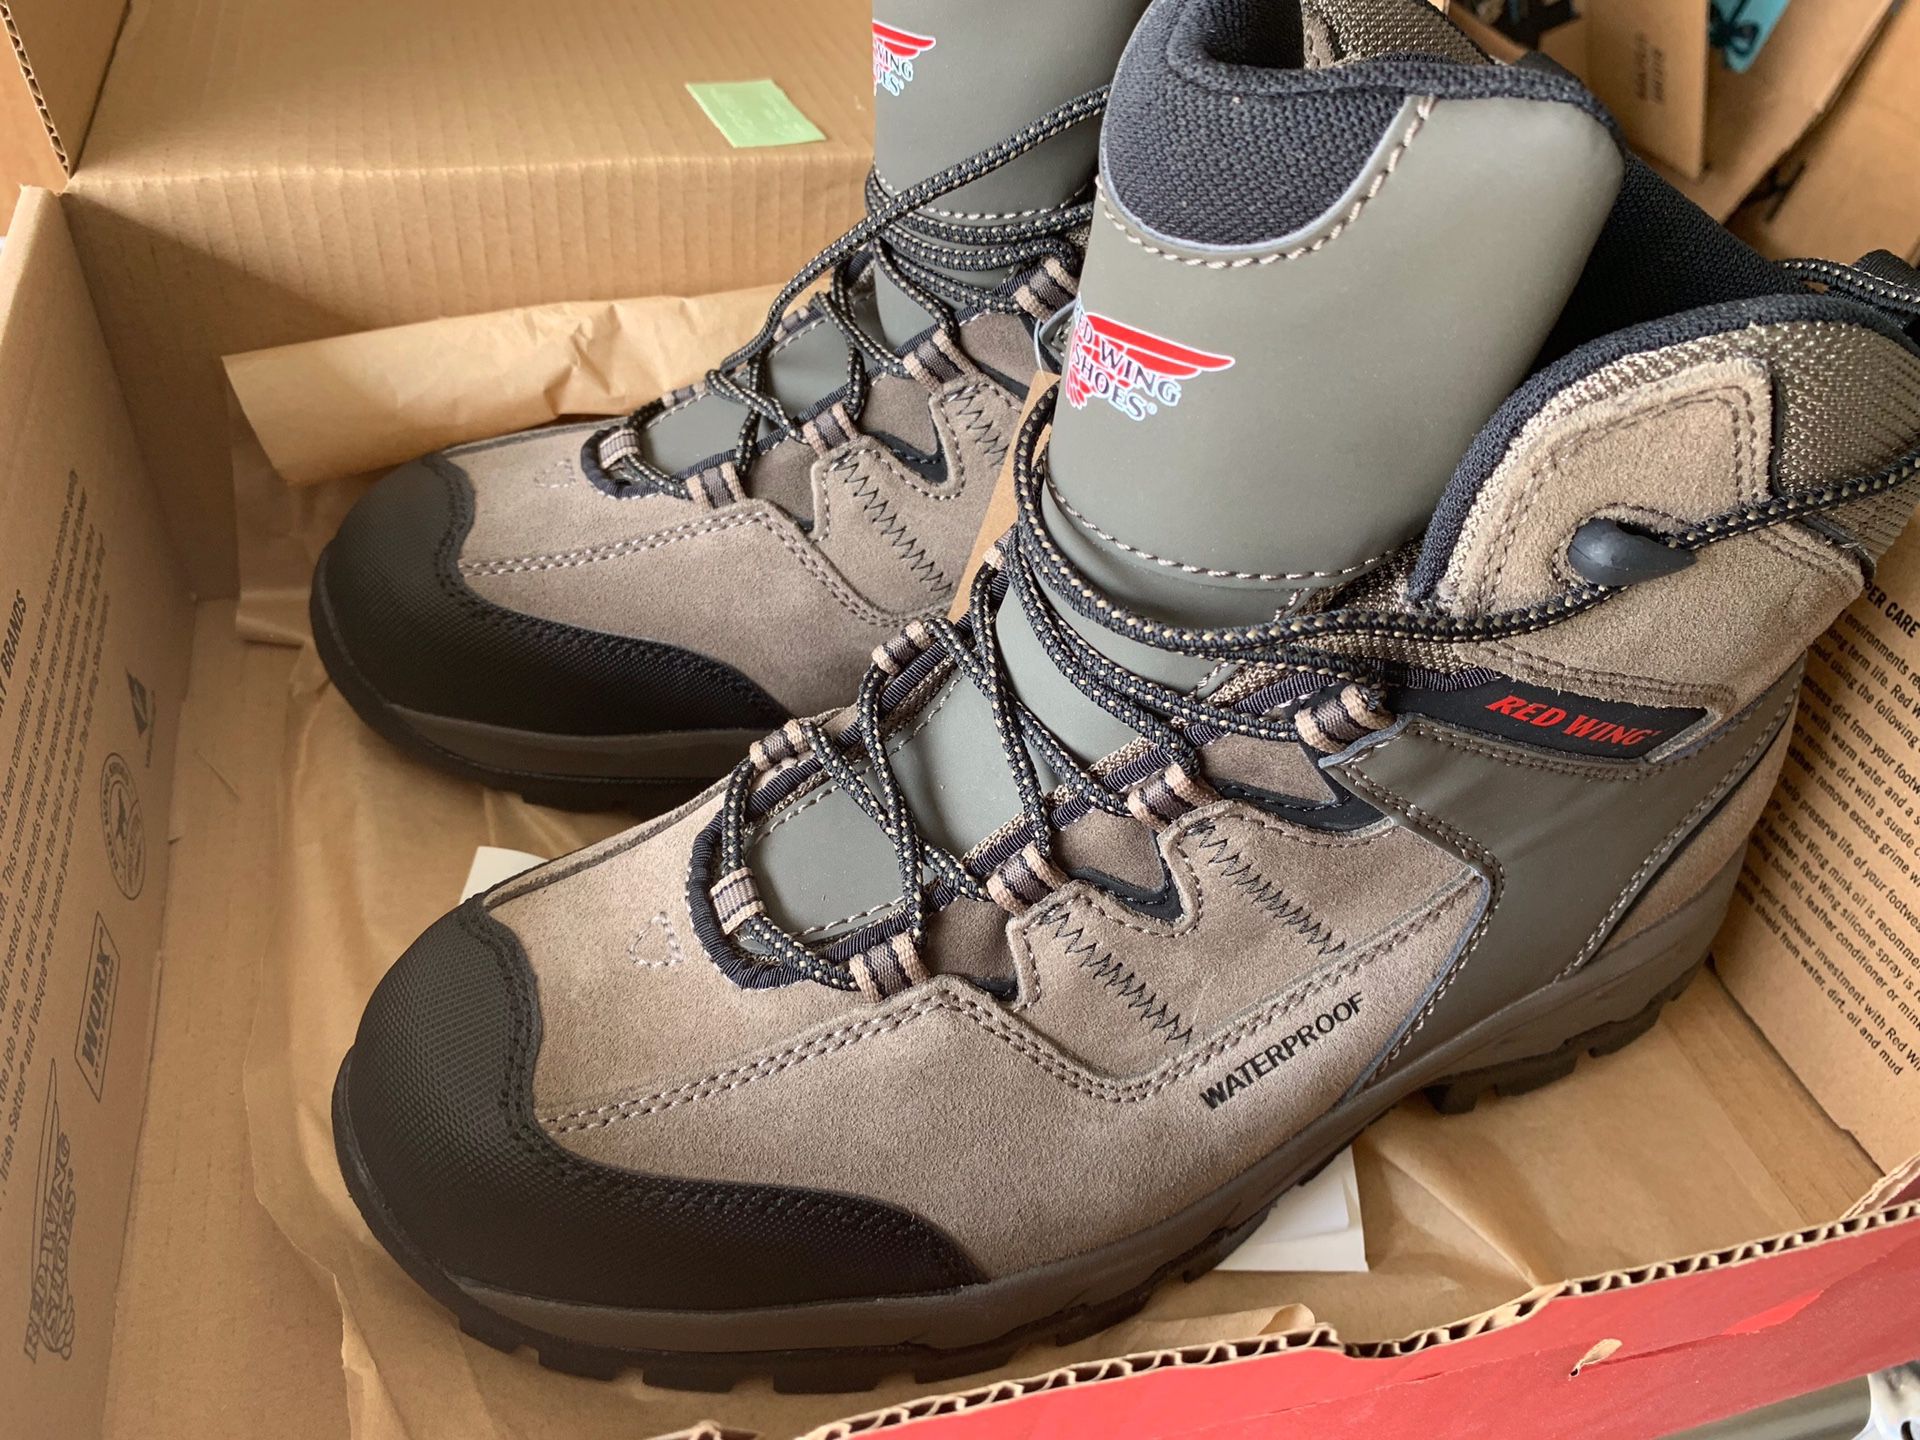 STYLE #6670 MEN'S TRUHIKER 6-INCH HIKER BOOT (New Never Worn) includes box